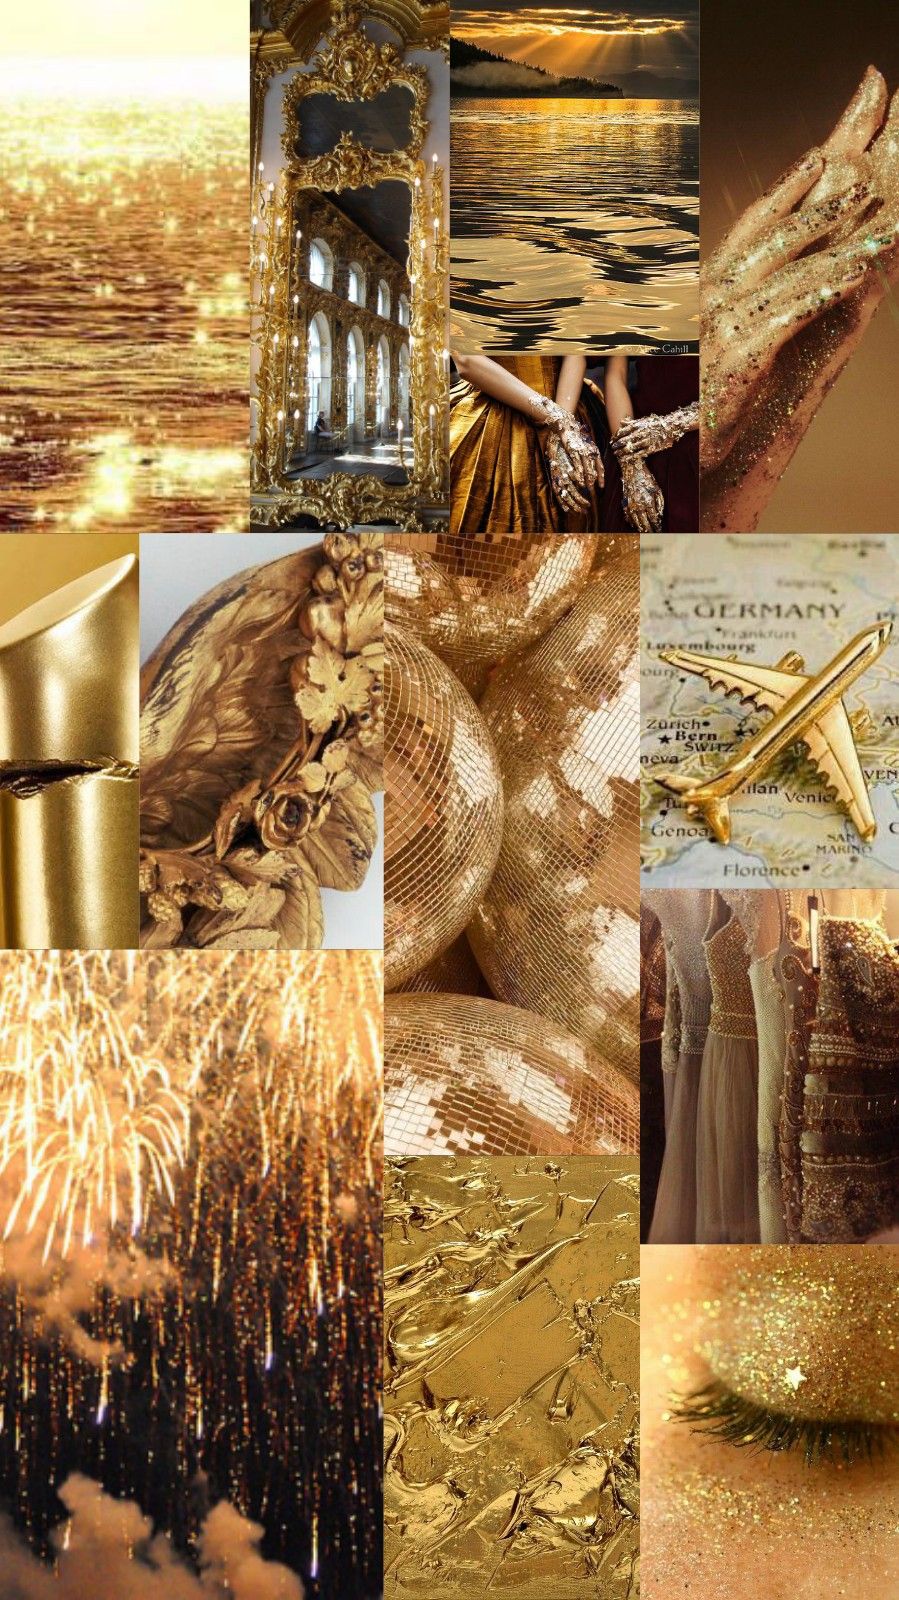 Wallpaper, background, collage, aesthetic, music, color, gold, golden. Black and gold aesthetic, Gold aesthetic, Golden wallpaper